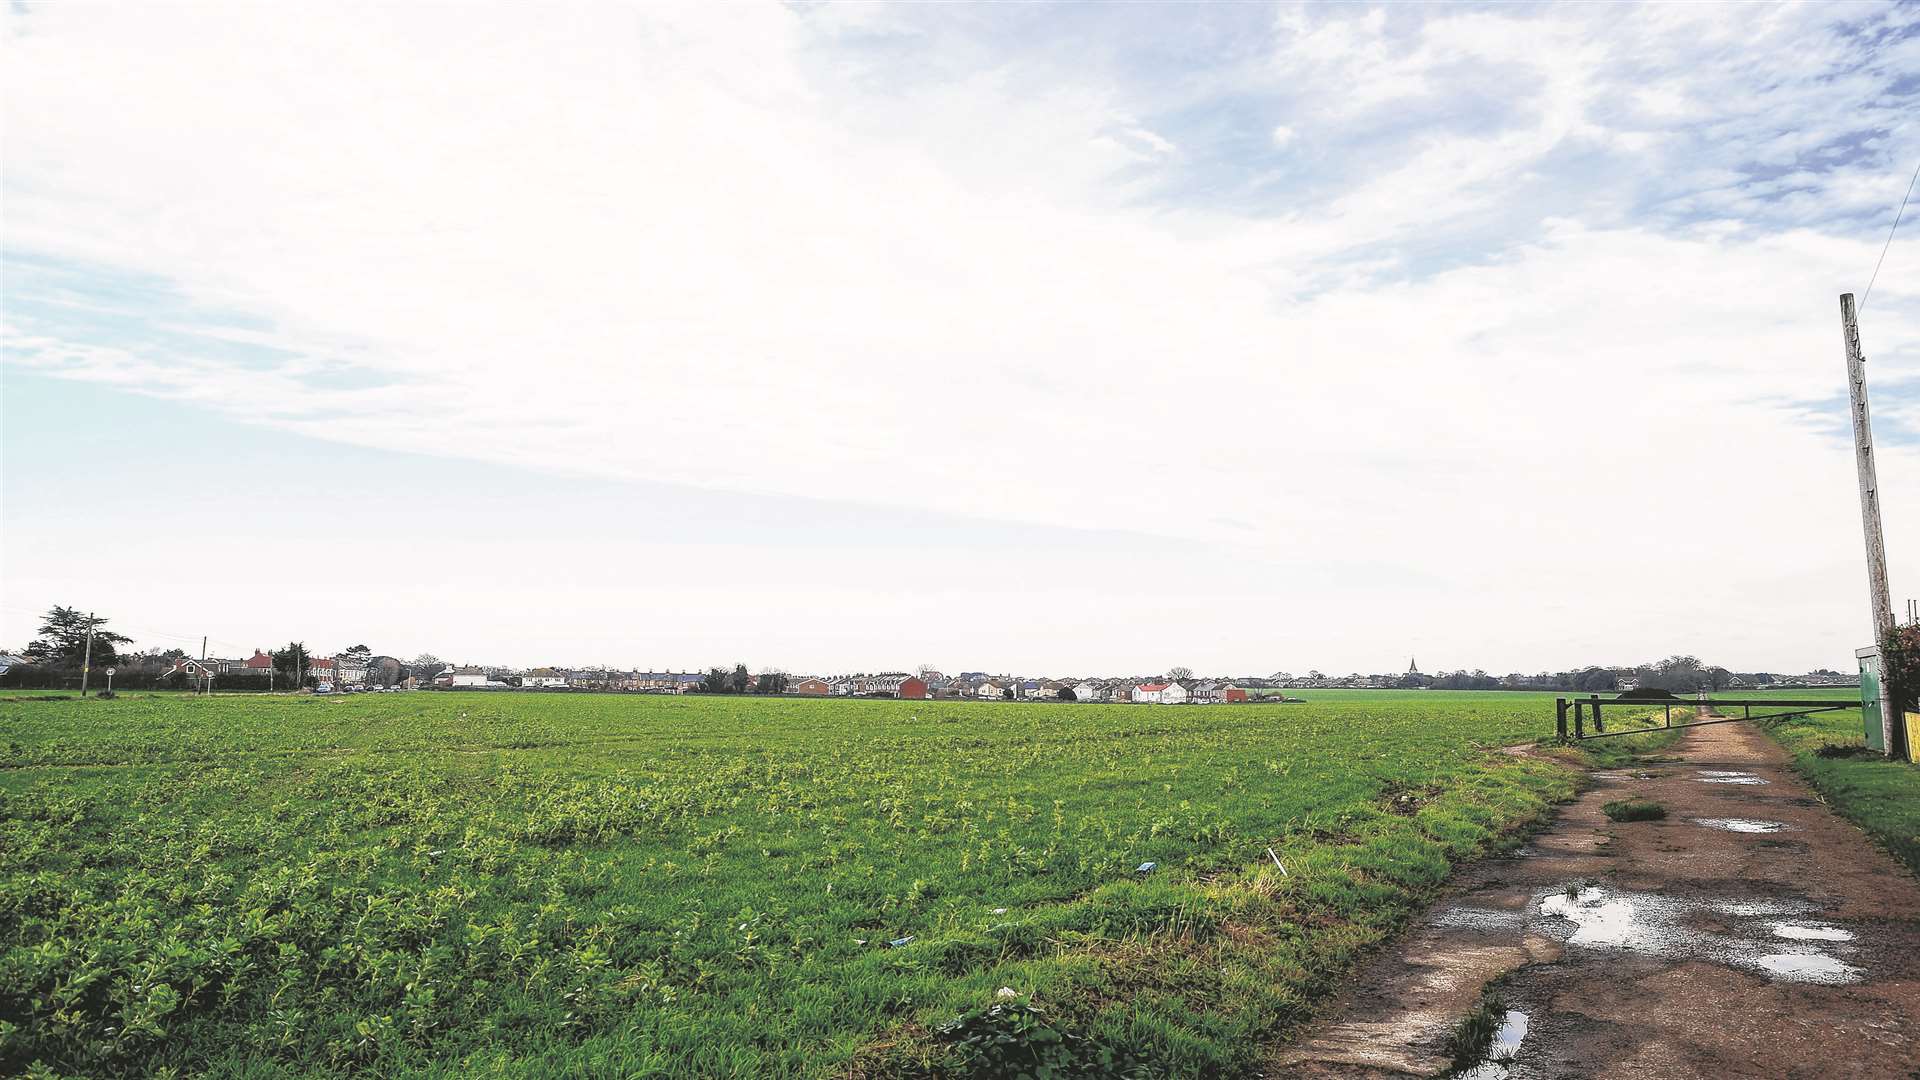 Plans for hundreds of homes on the Garlinge/Westgate border are proving controversial